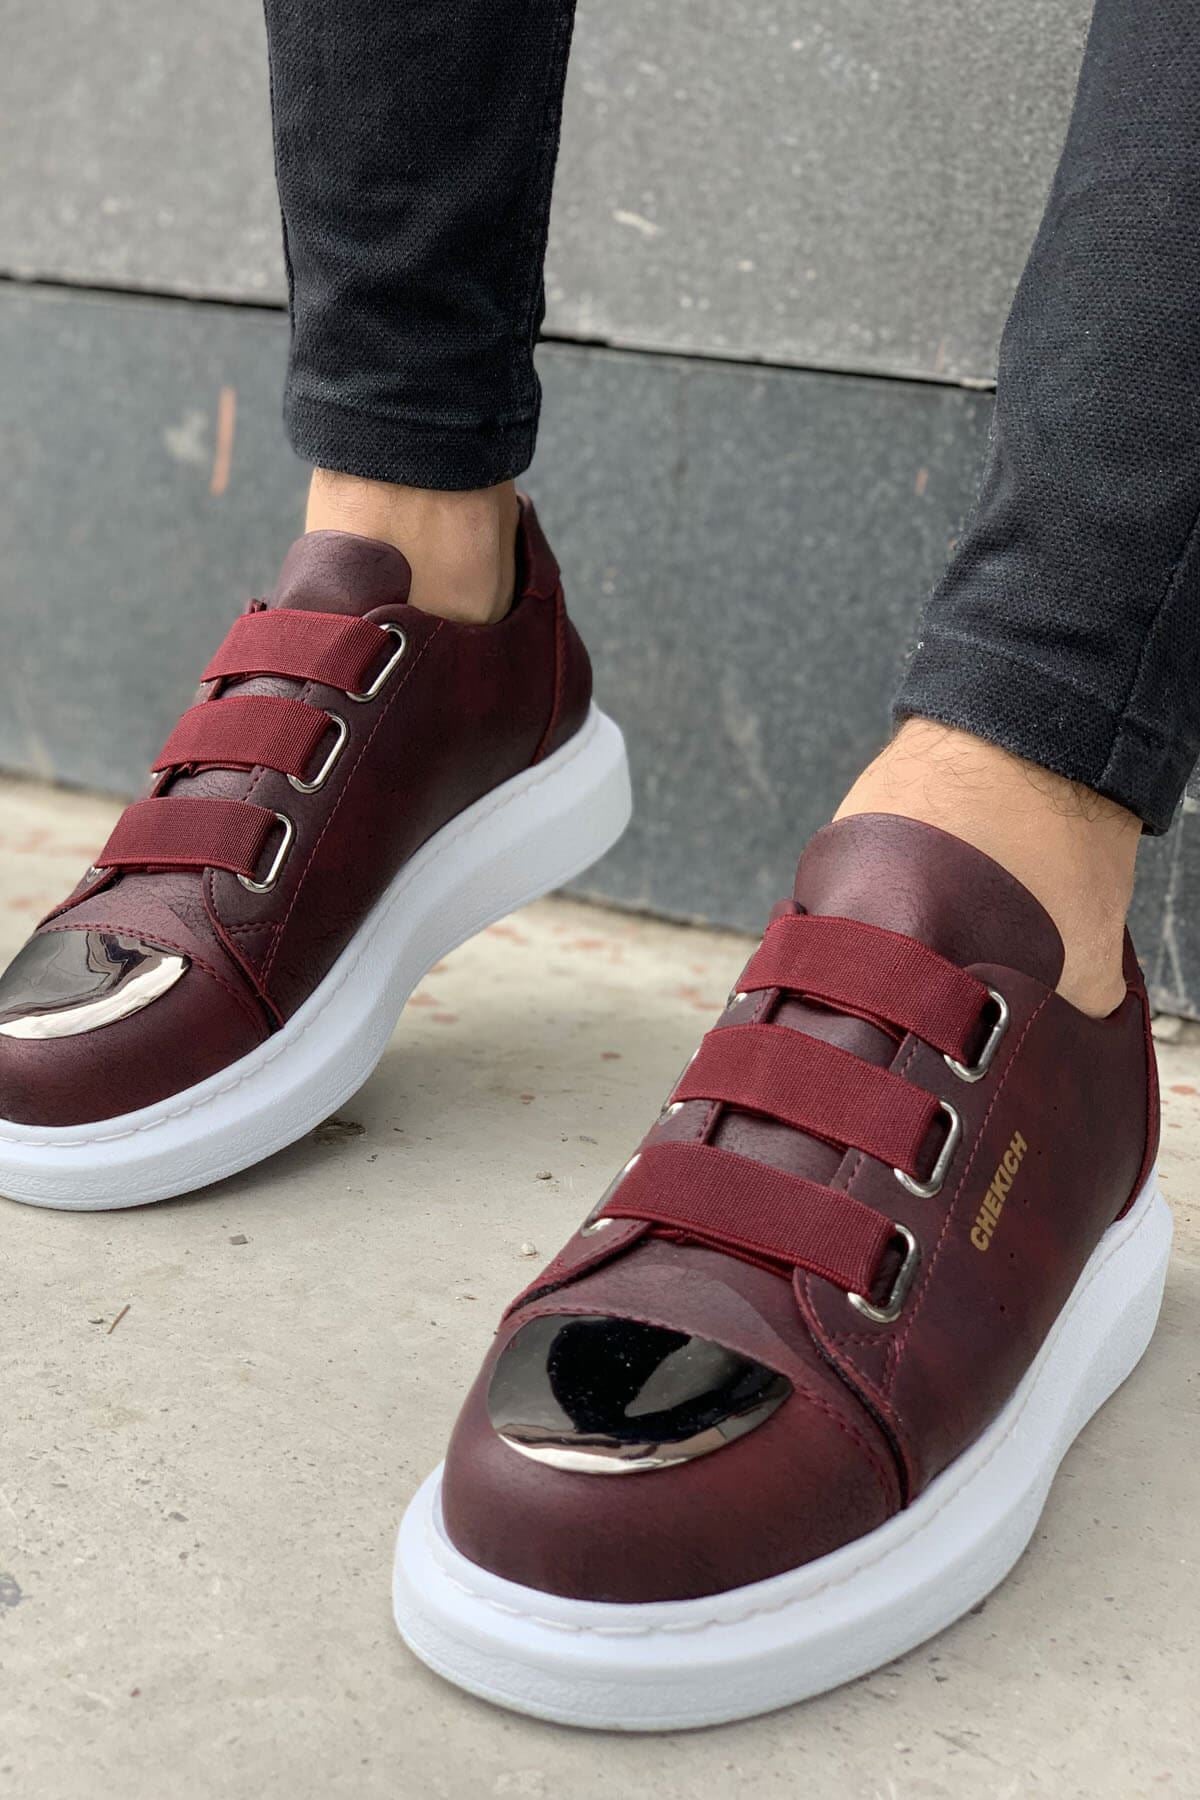 CH251 Men's Unisex Burgundy-New Trend Shiny Accessory Casual Sneaker Sports Shoes - STREETMODE™